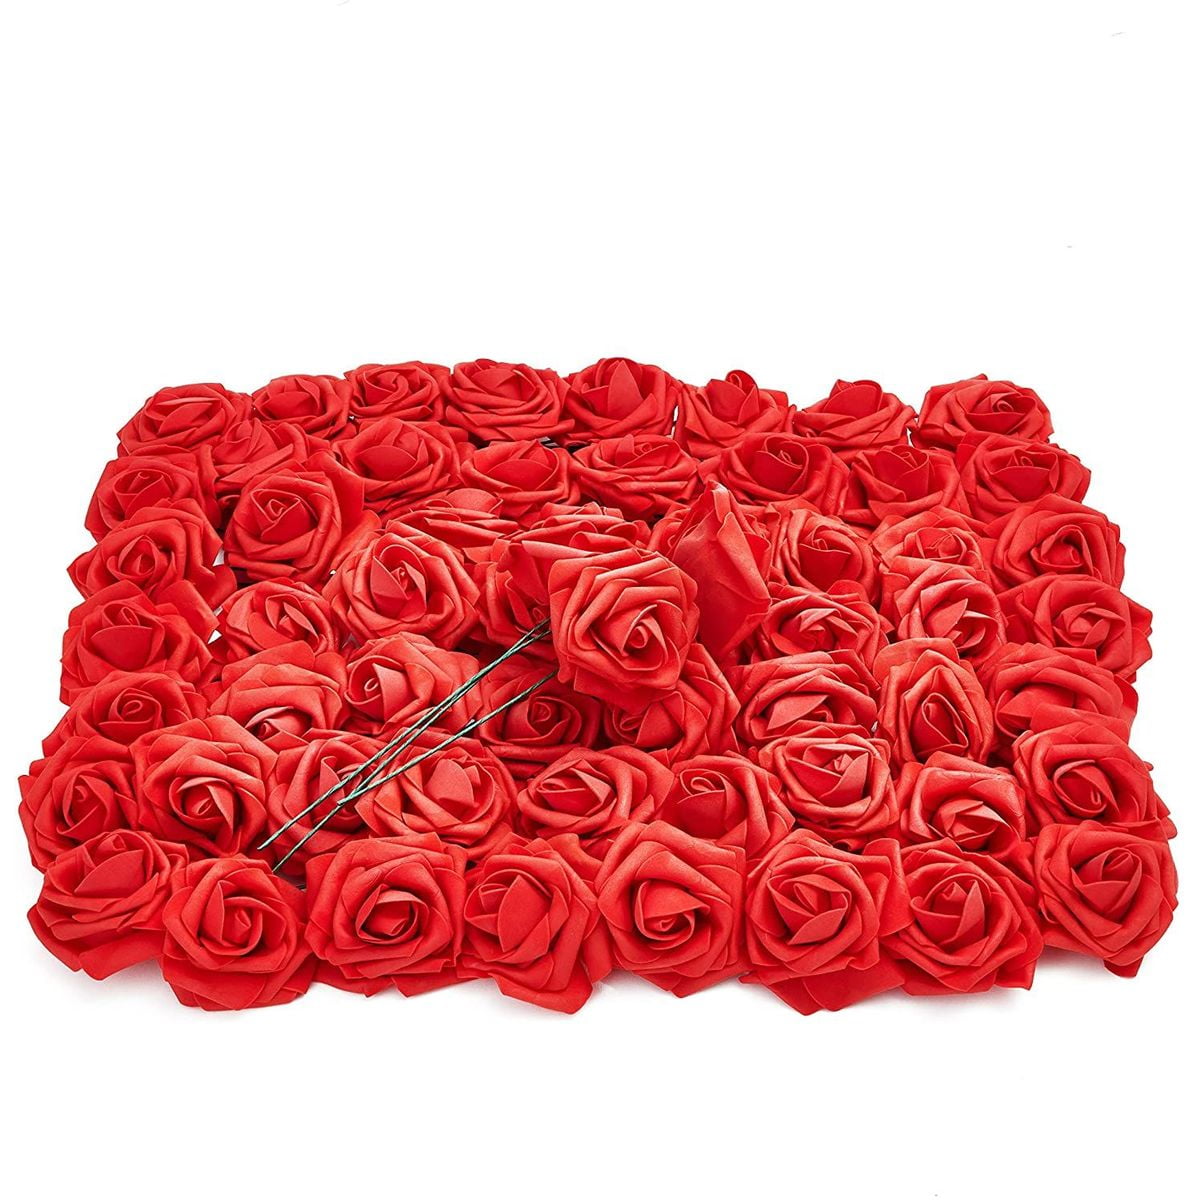 500 Foam Mini Roses WHOLESALE Heads Buds Small Flowers Wedding Home Partys New 